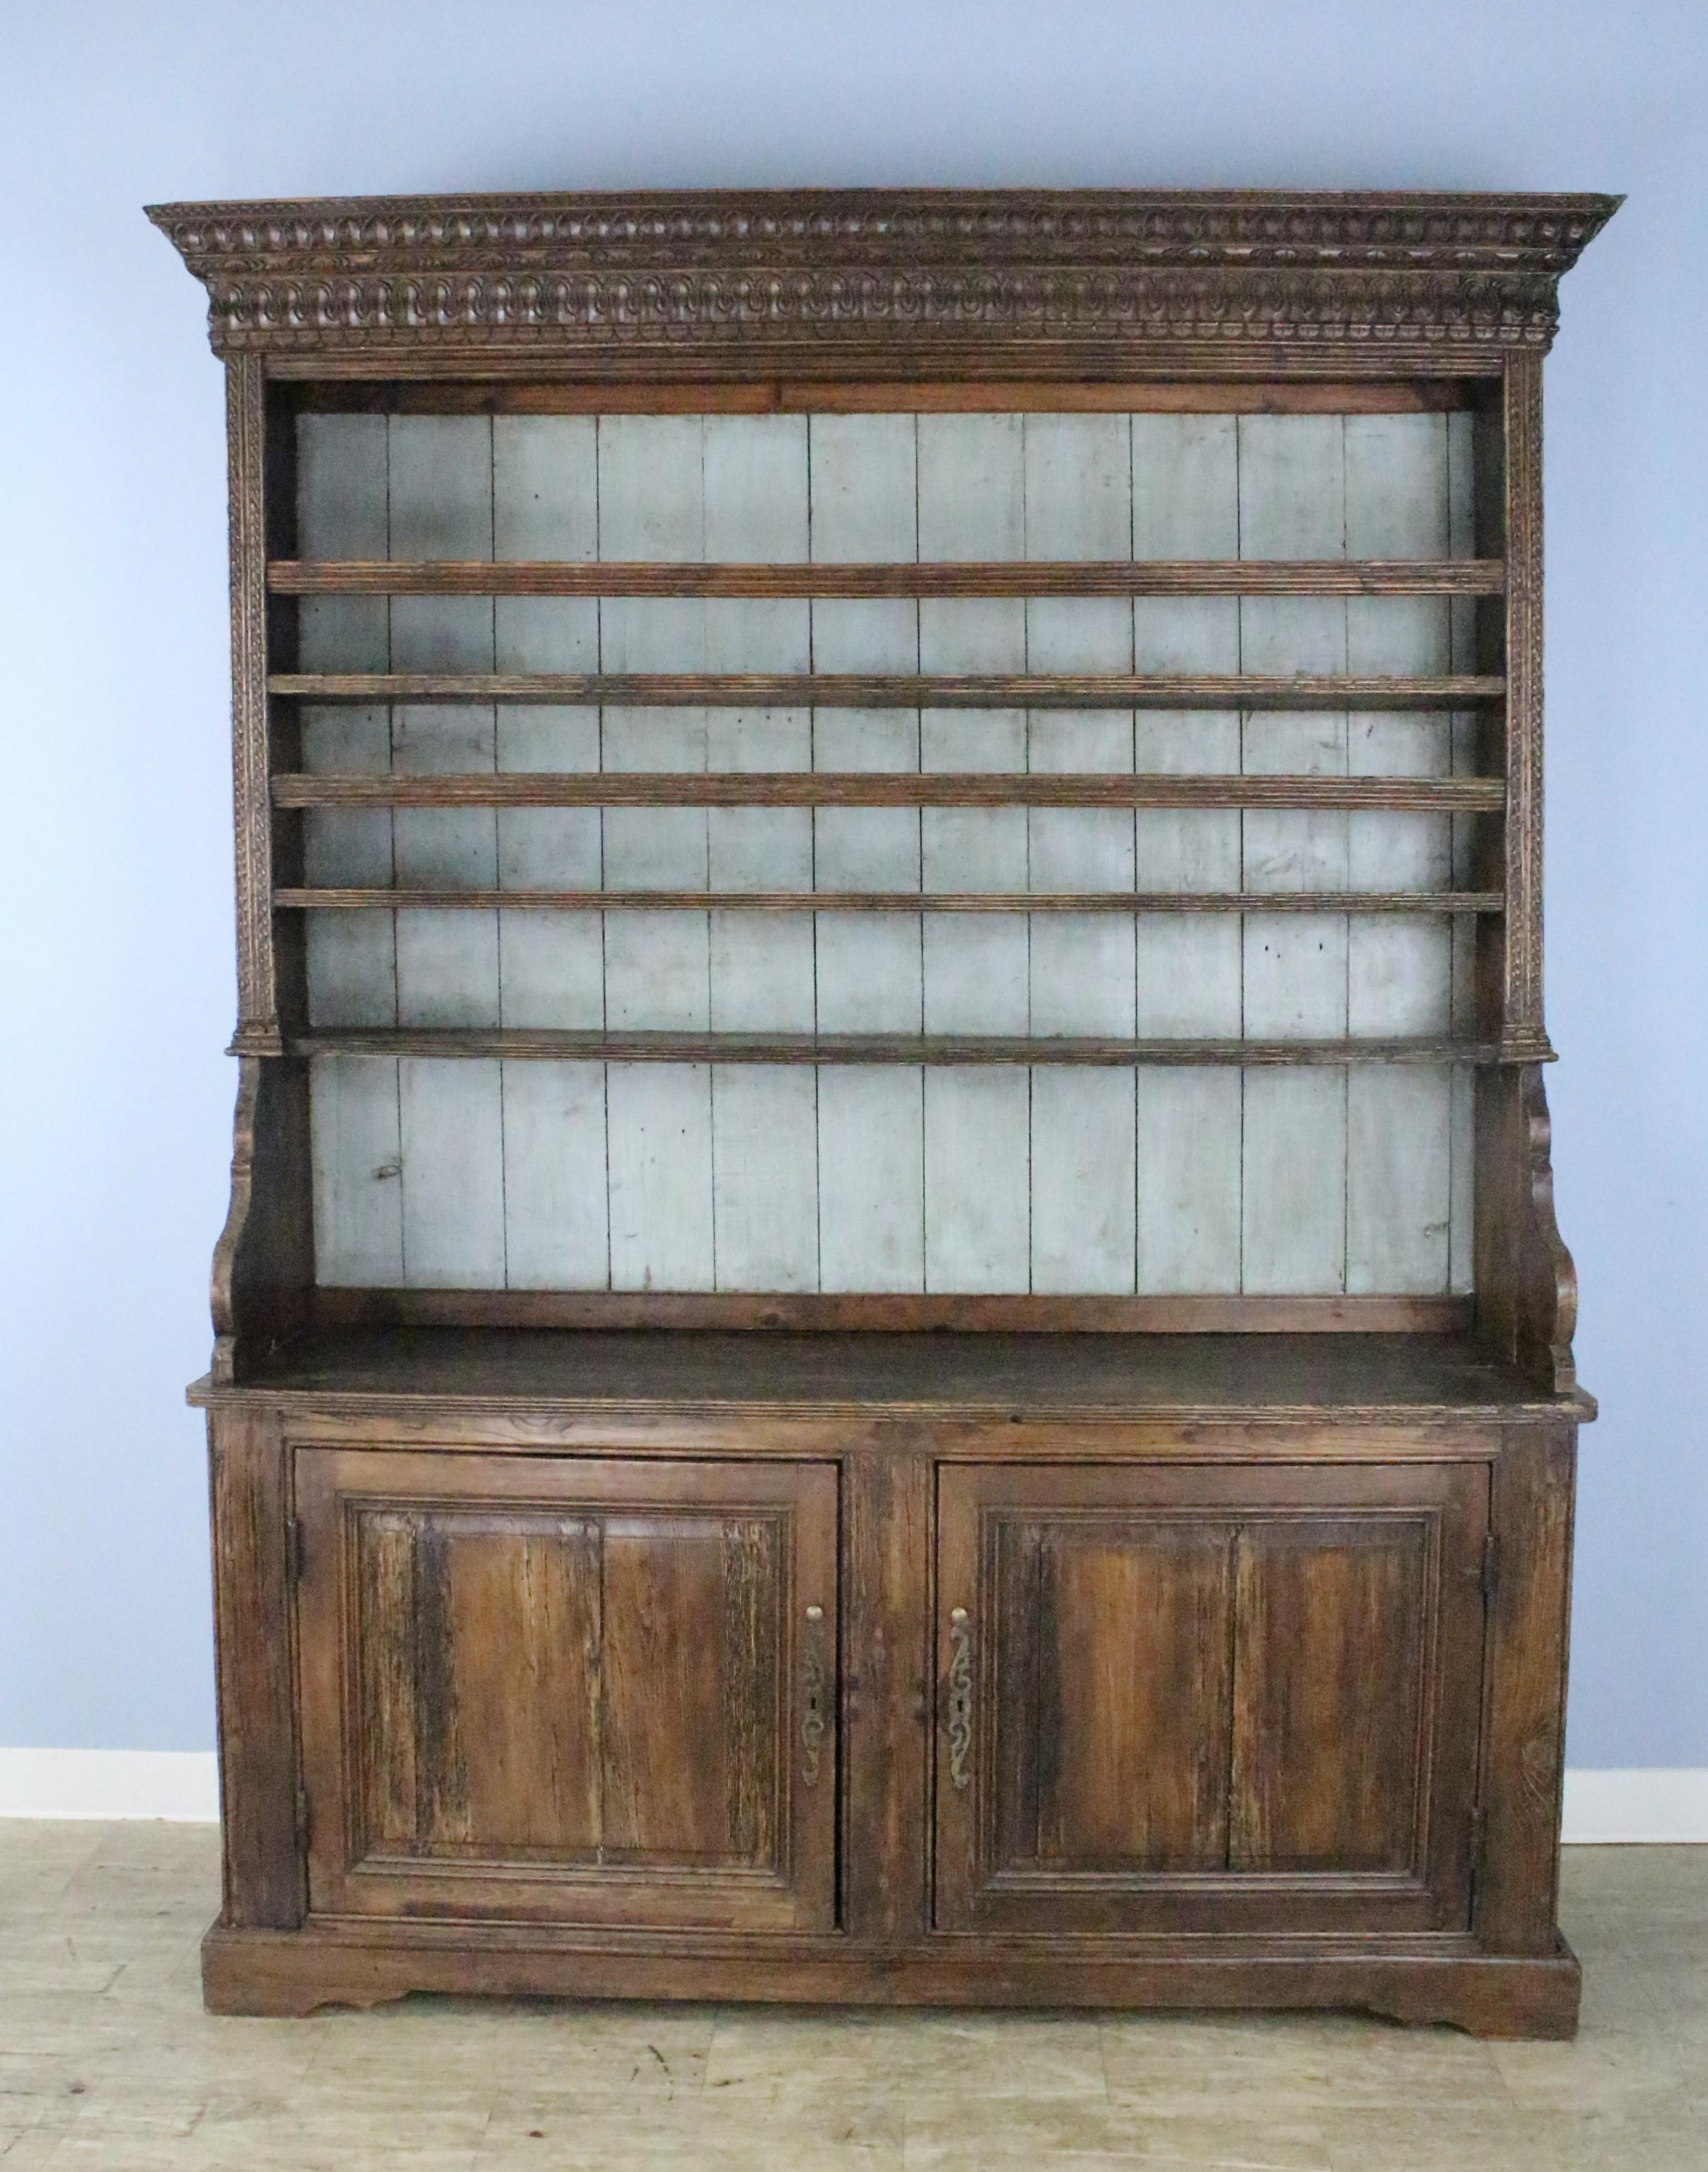 A well distressed French pine dresser, grand in scale. Both the base and the shelf, complete with three plate racks, each 9 inches deep, are solid and sturdy. The cupboard is deep and roomy, and the doors shut nicely. The back of the plate rack has